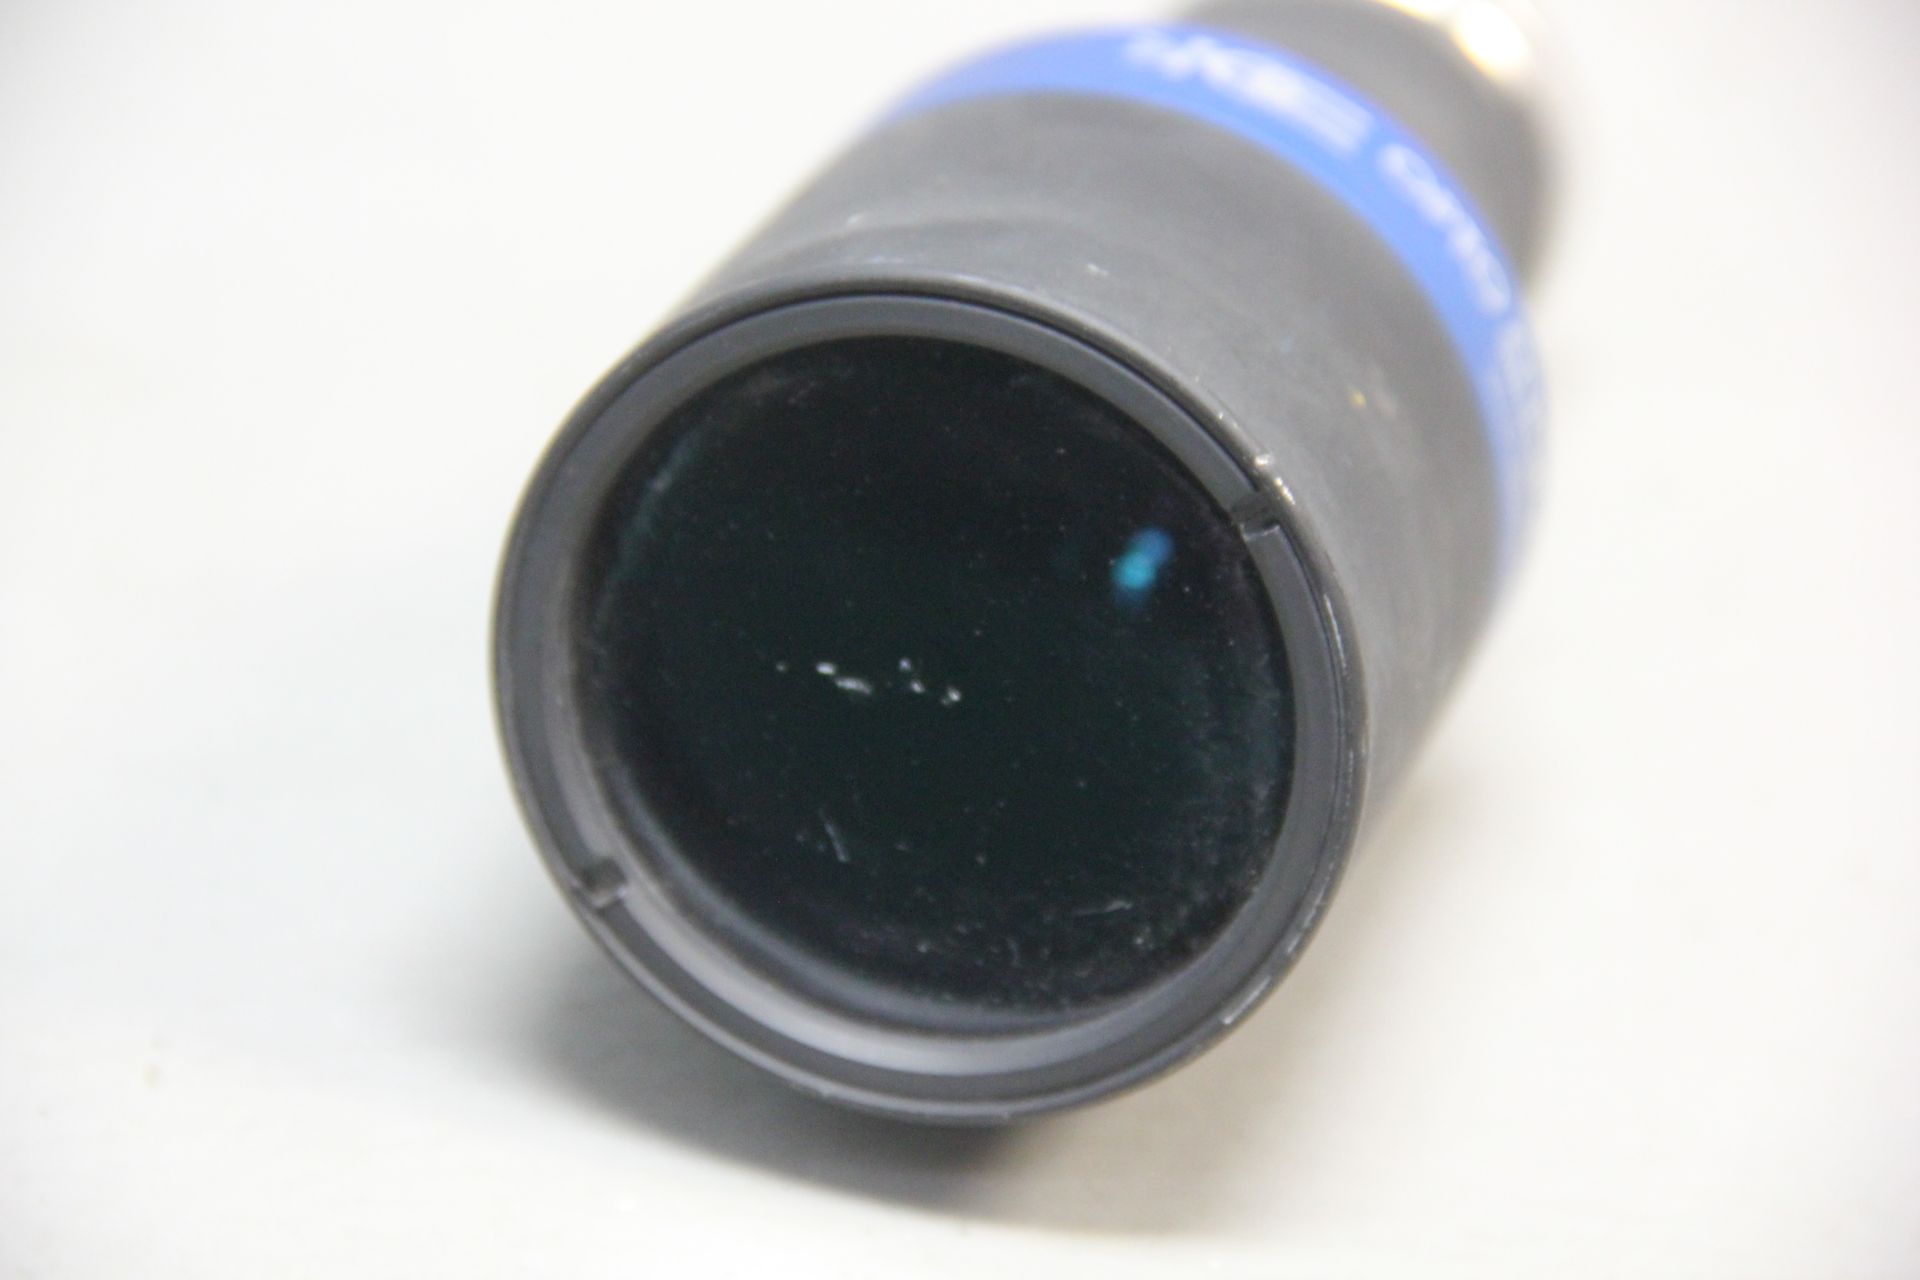 3 OPTO ENGINEERING TELECENTRIC LENSES - Image 7 of 7